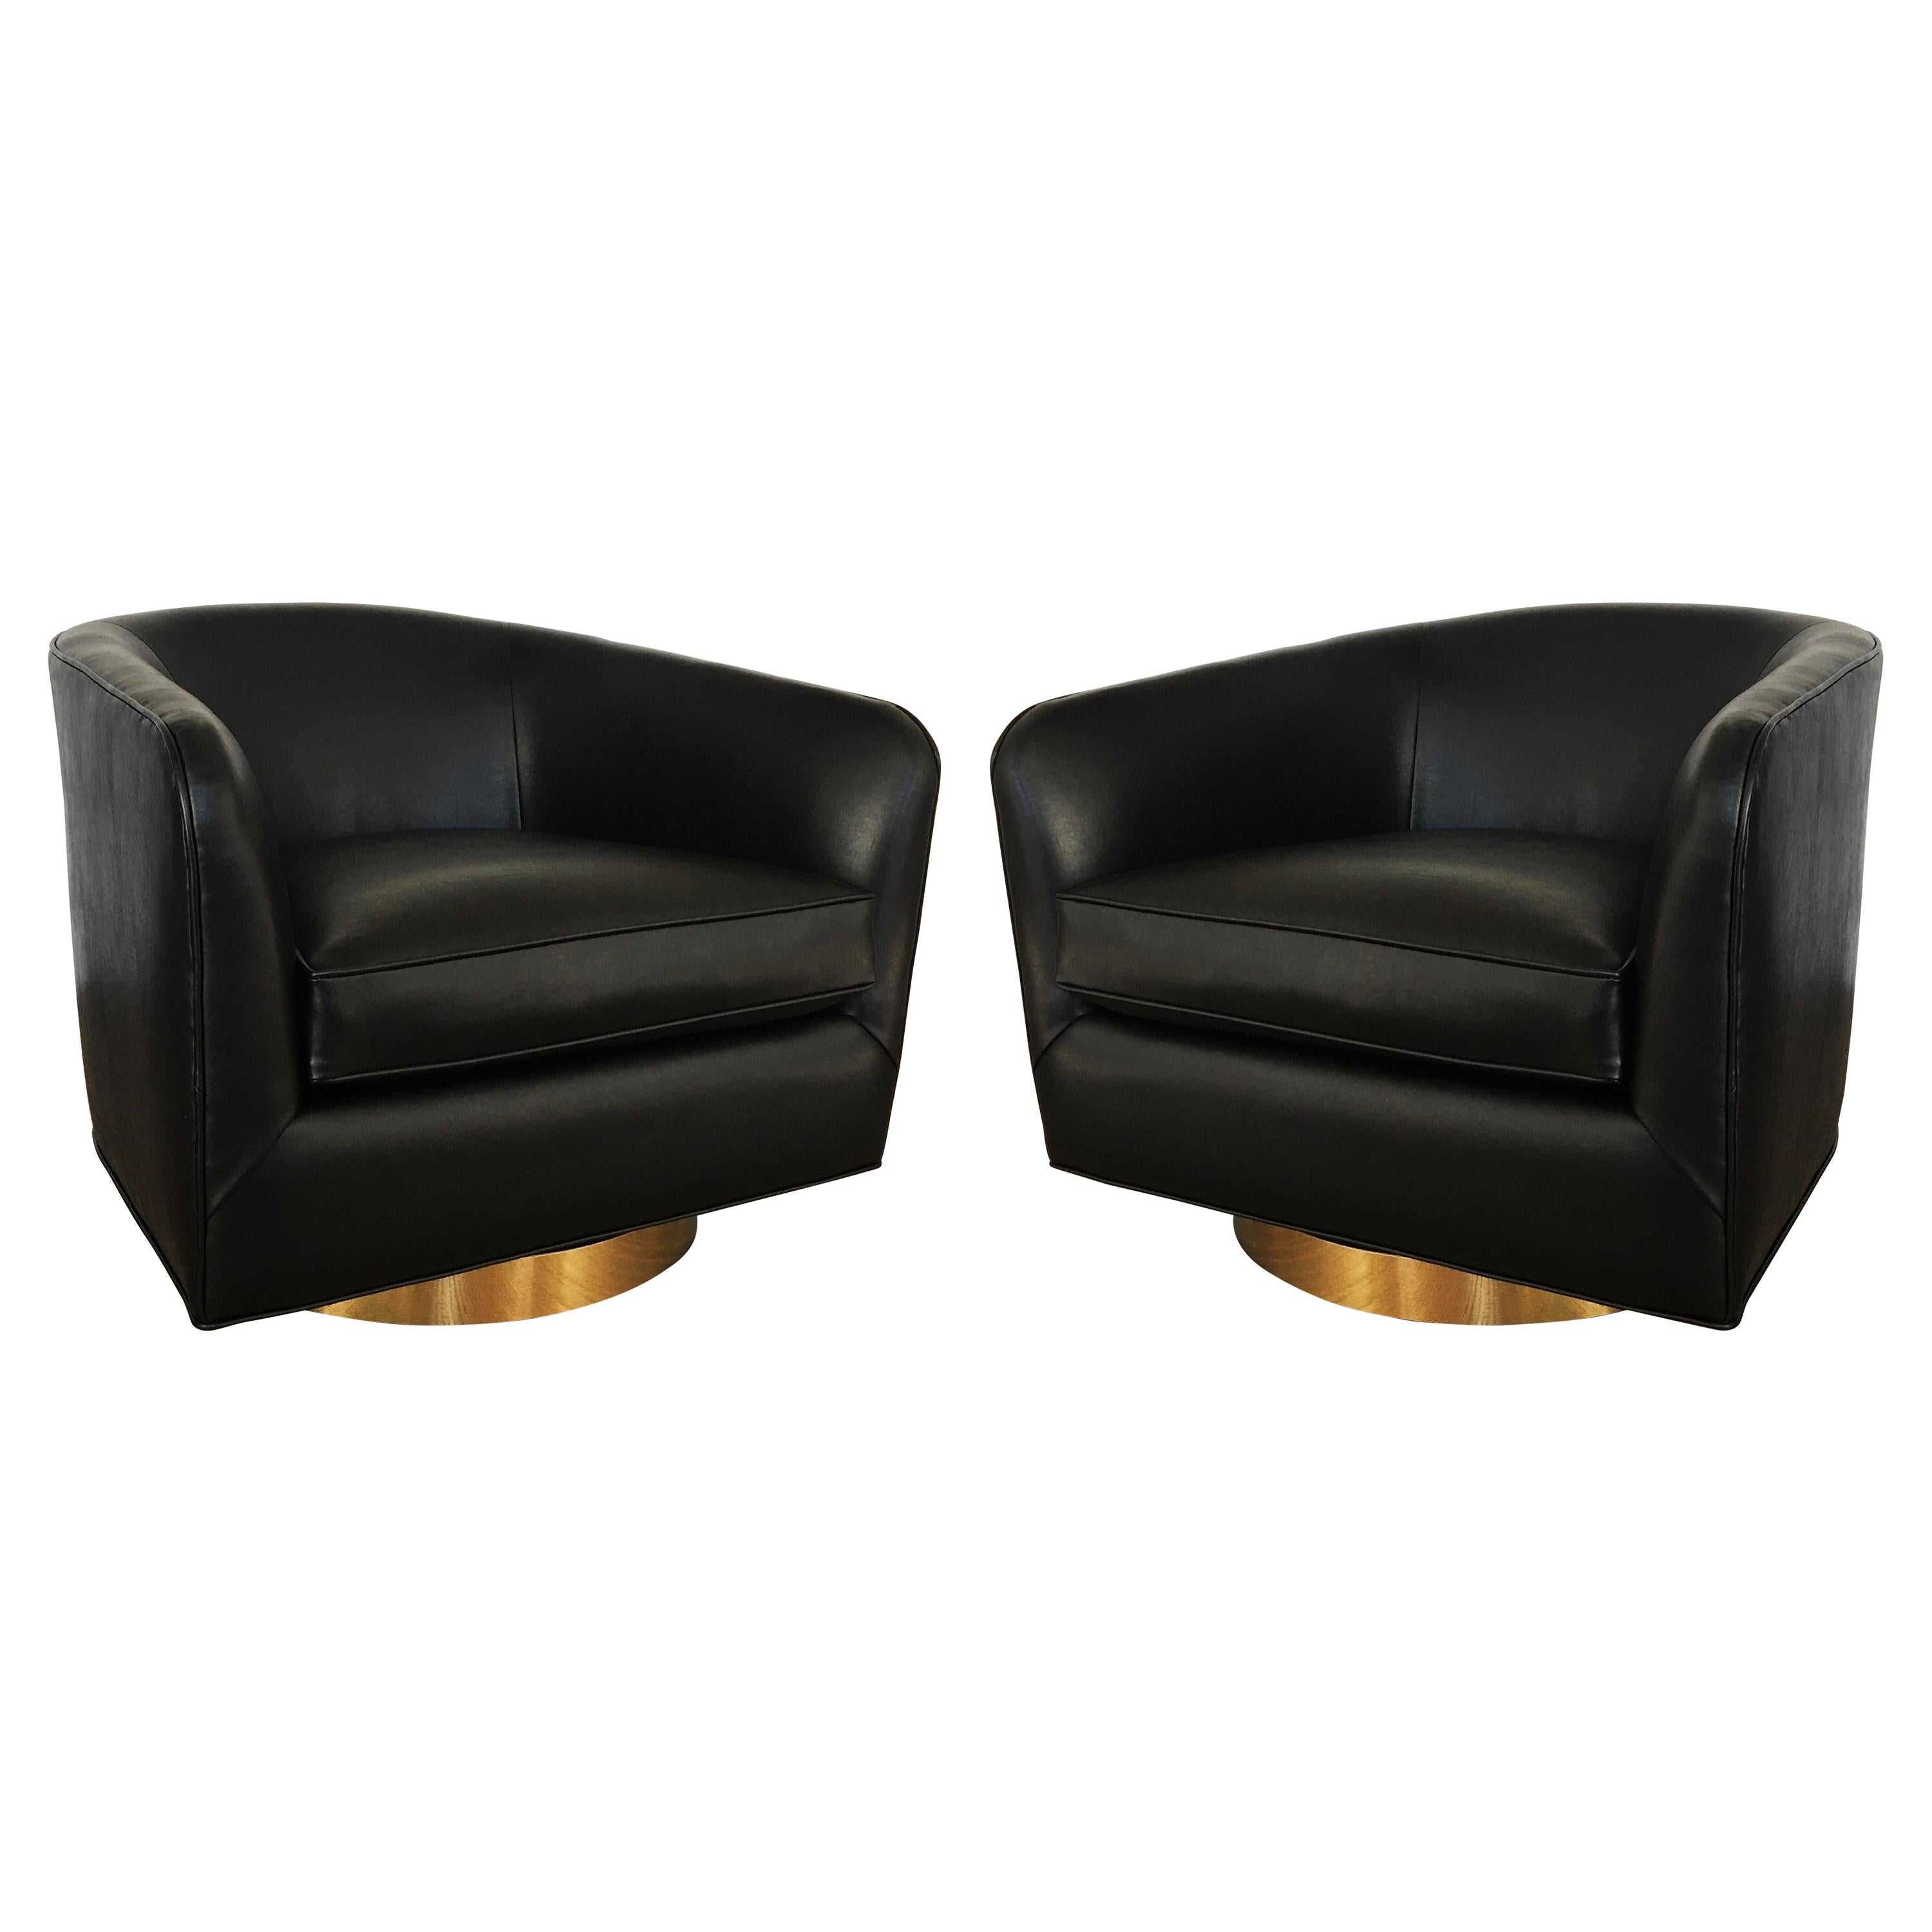 Pair of Newly Upholstered Black Milo Baughman Swivel Chairs with Brass Plinths